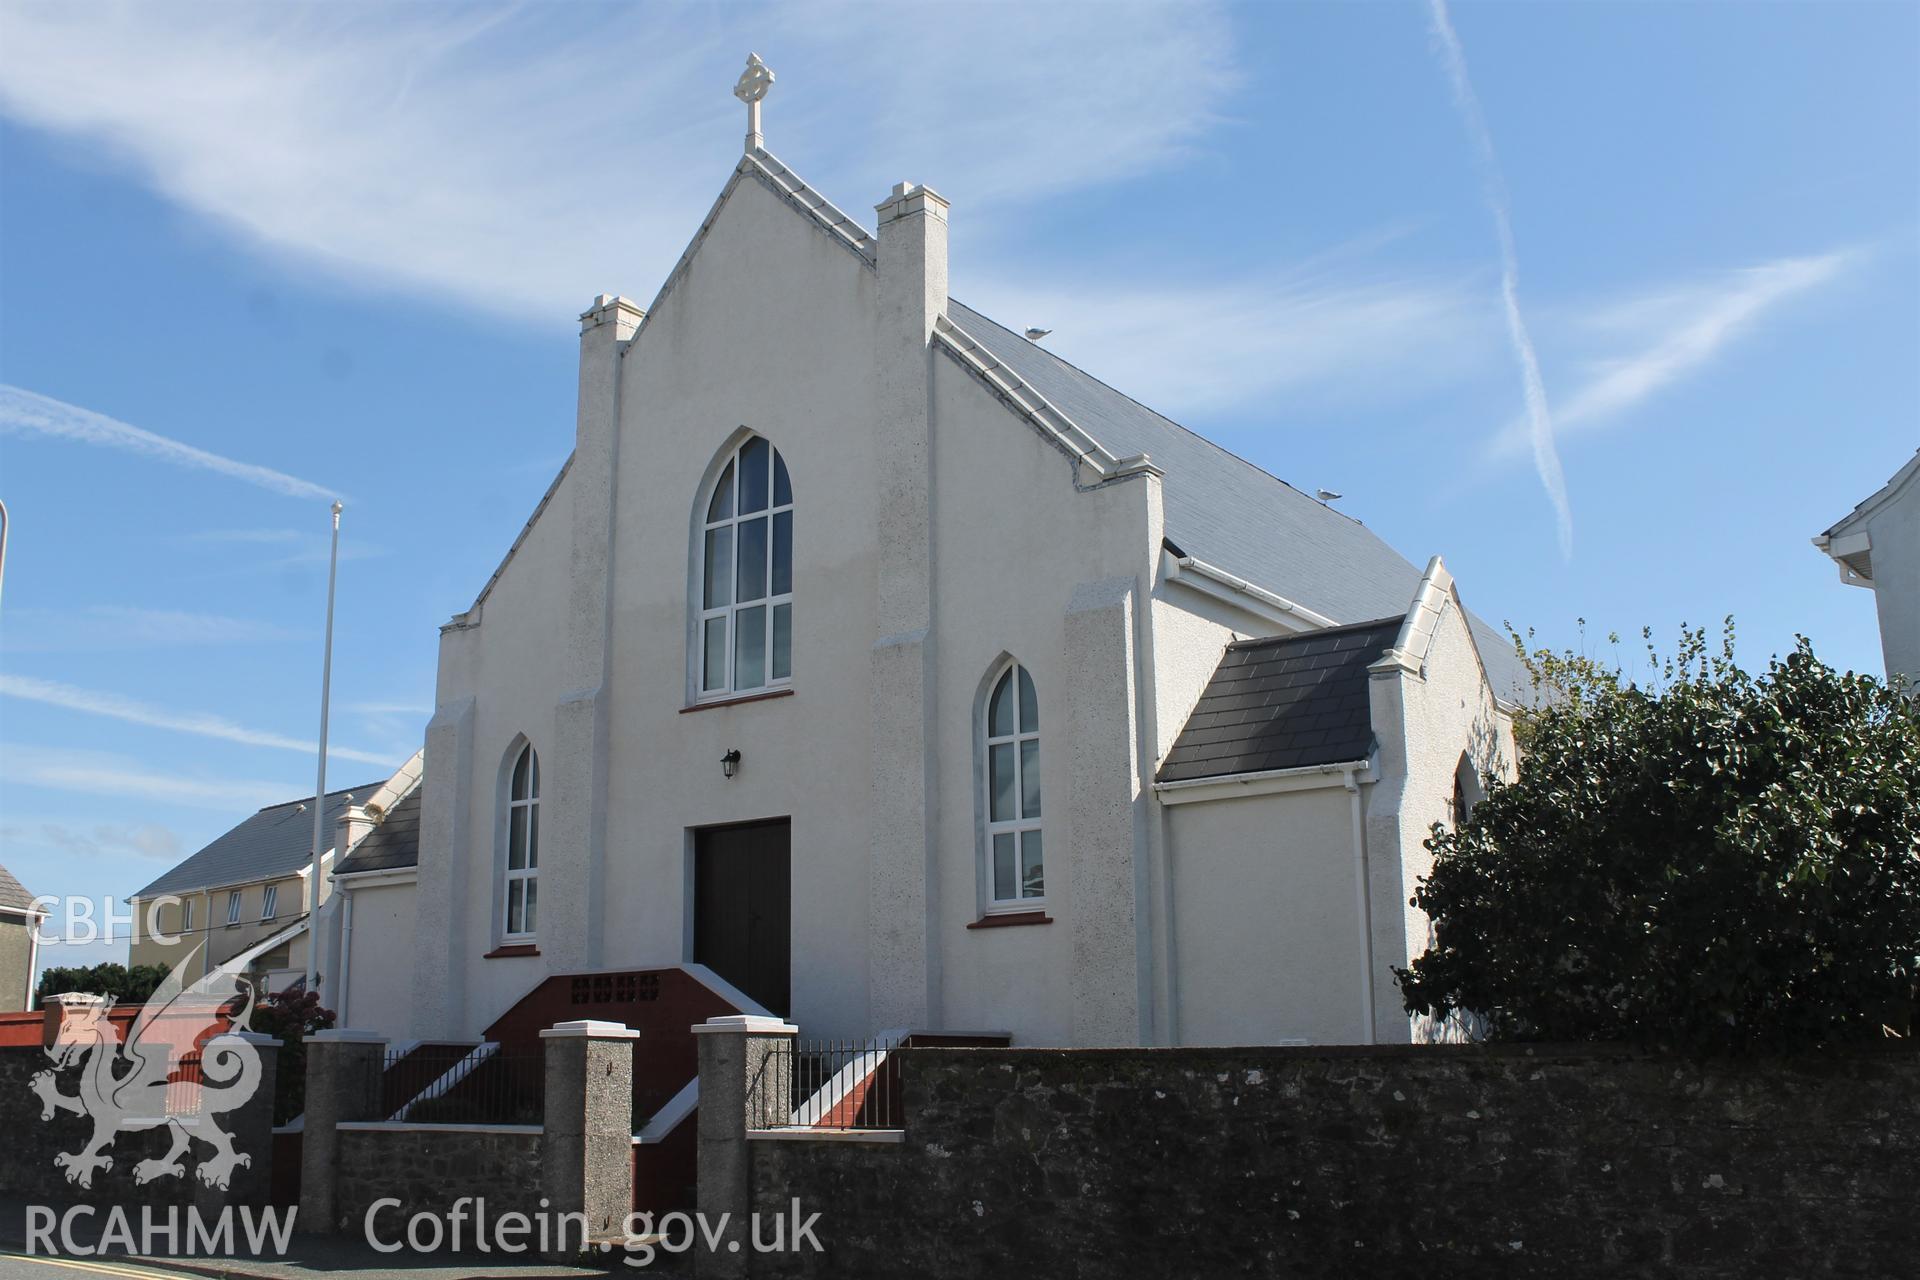 Digital colour photograph showing exterior of St Francis's Catholic church, Milford Haven.